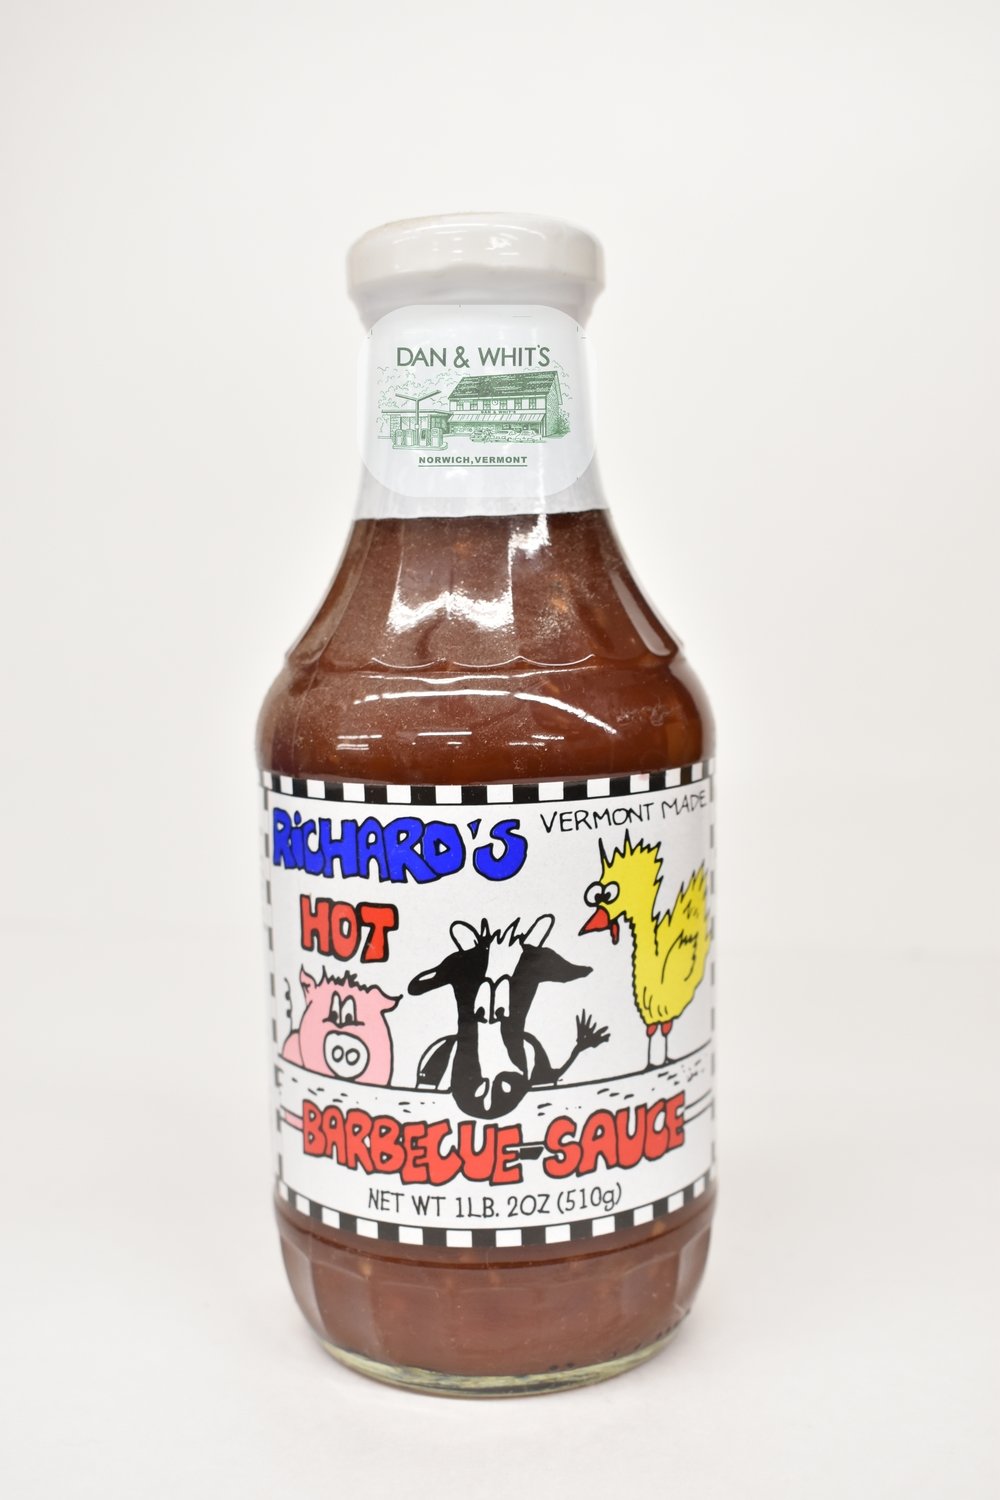 Richard's Hot Barbecue Sauce